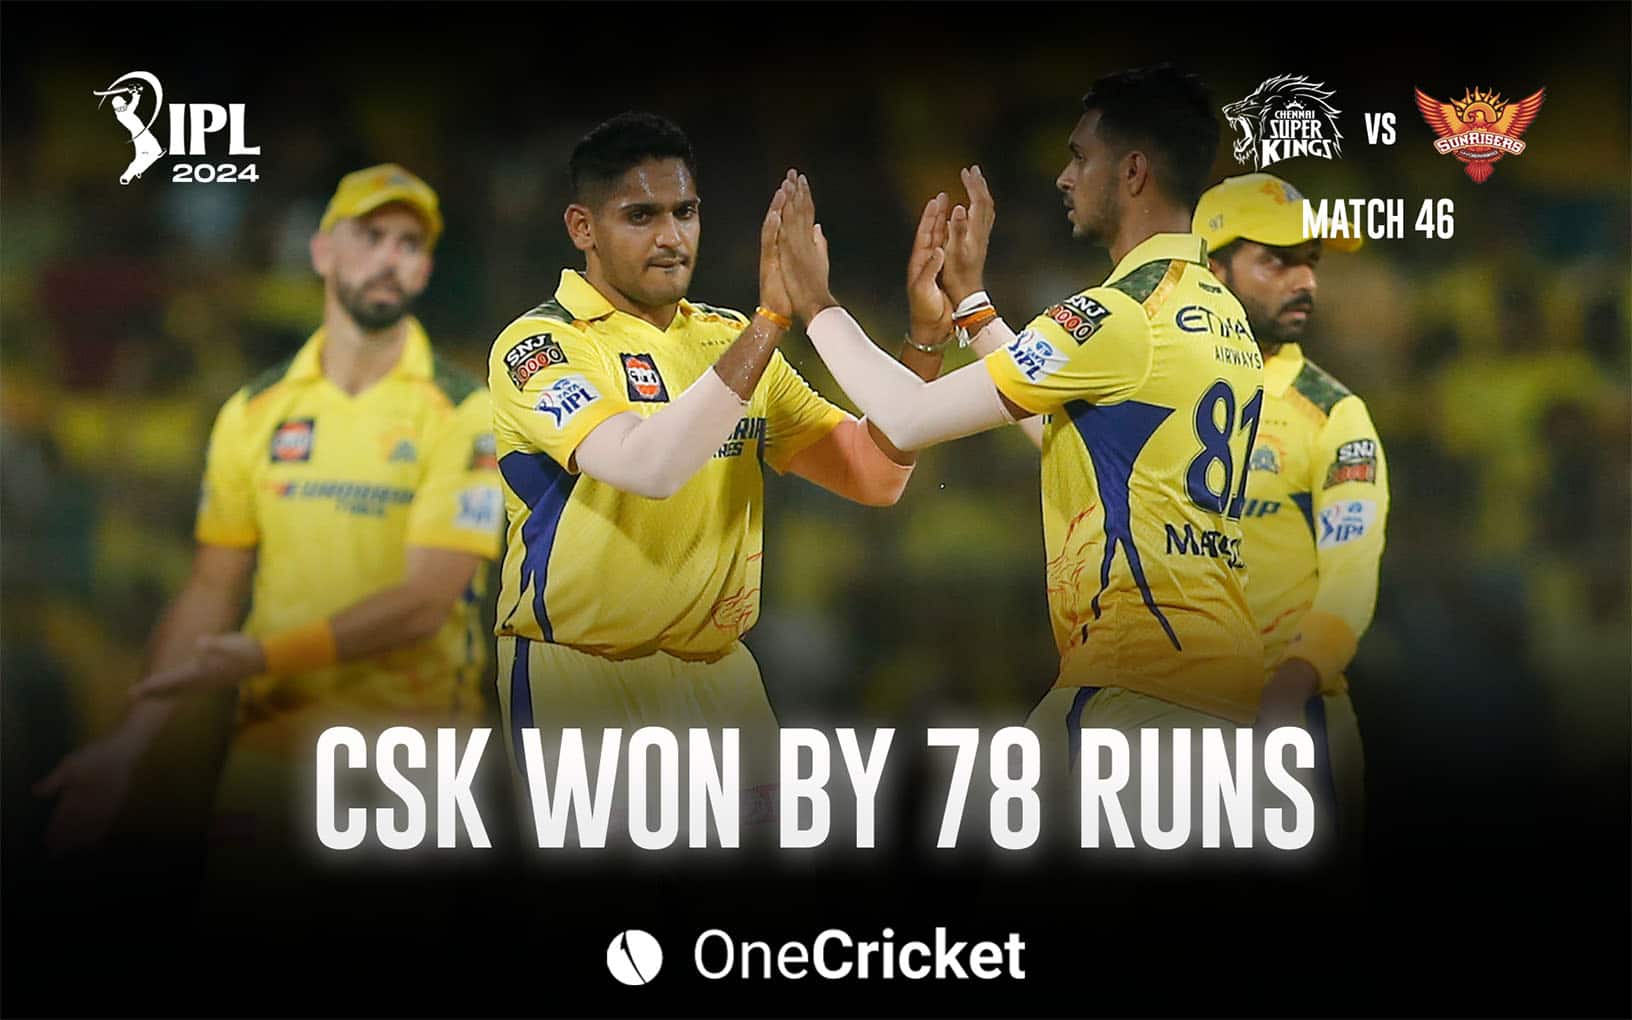 SRH toppled as CSK won by 78 runs in Chennai on Sunday (OneCricket)